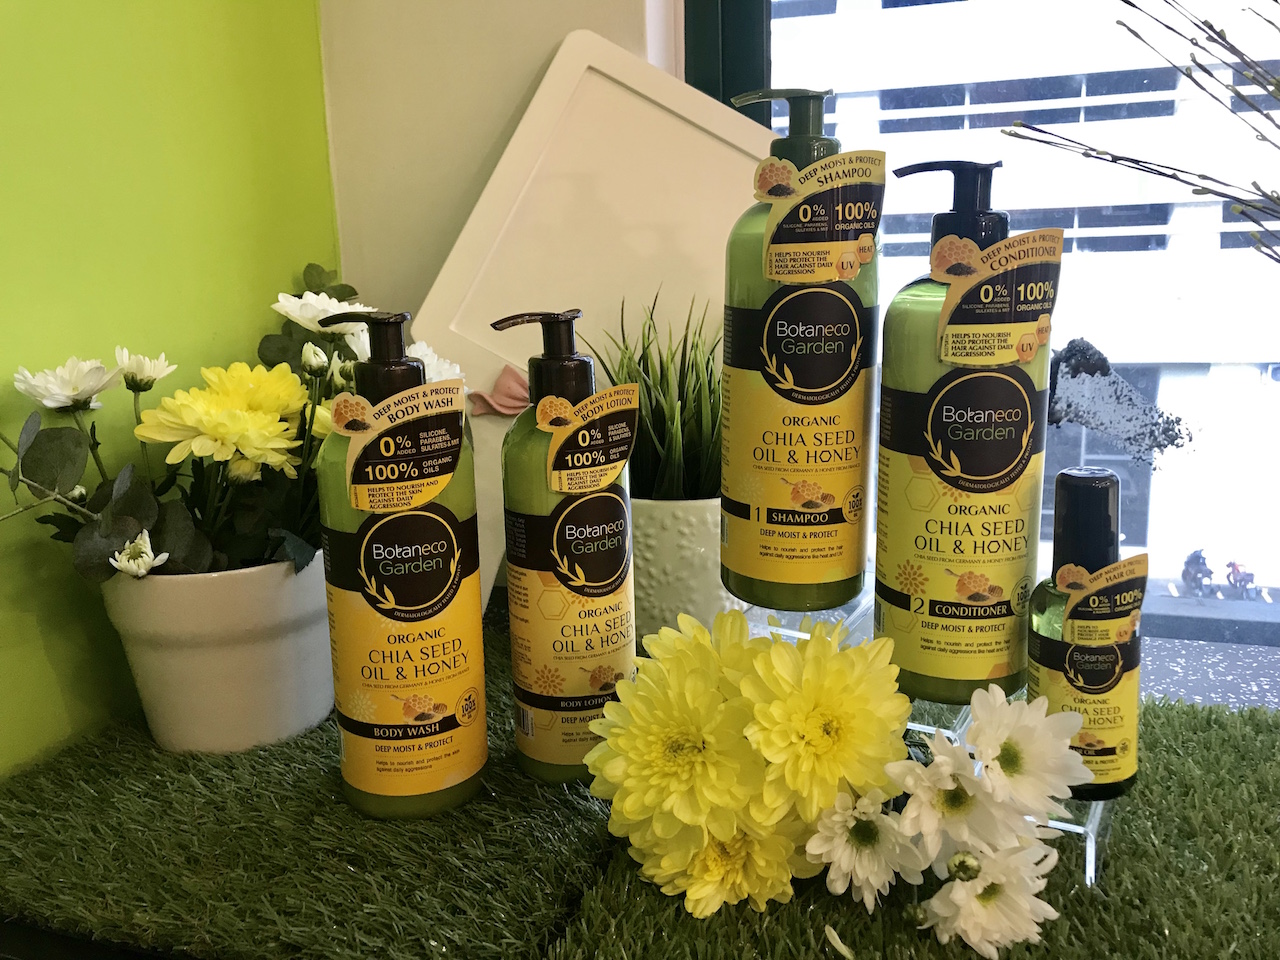 Scenes: Guardian Malaysia Introduces Botaneco Garden Organic Chia Seed Oil  and Honey Range for Deeply Moisturising Hair Care & Skin Care 